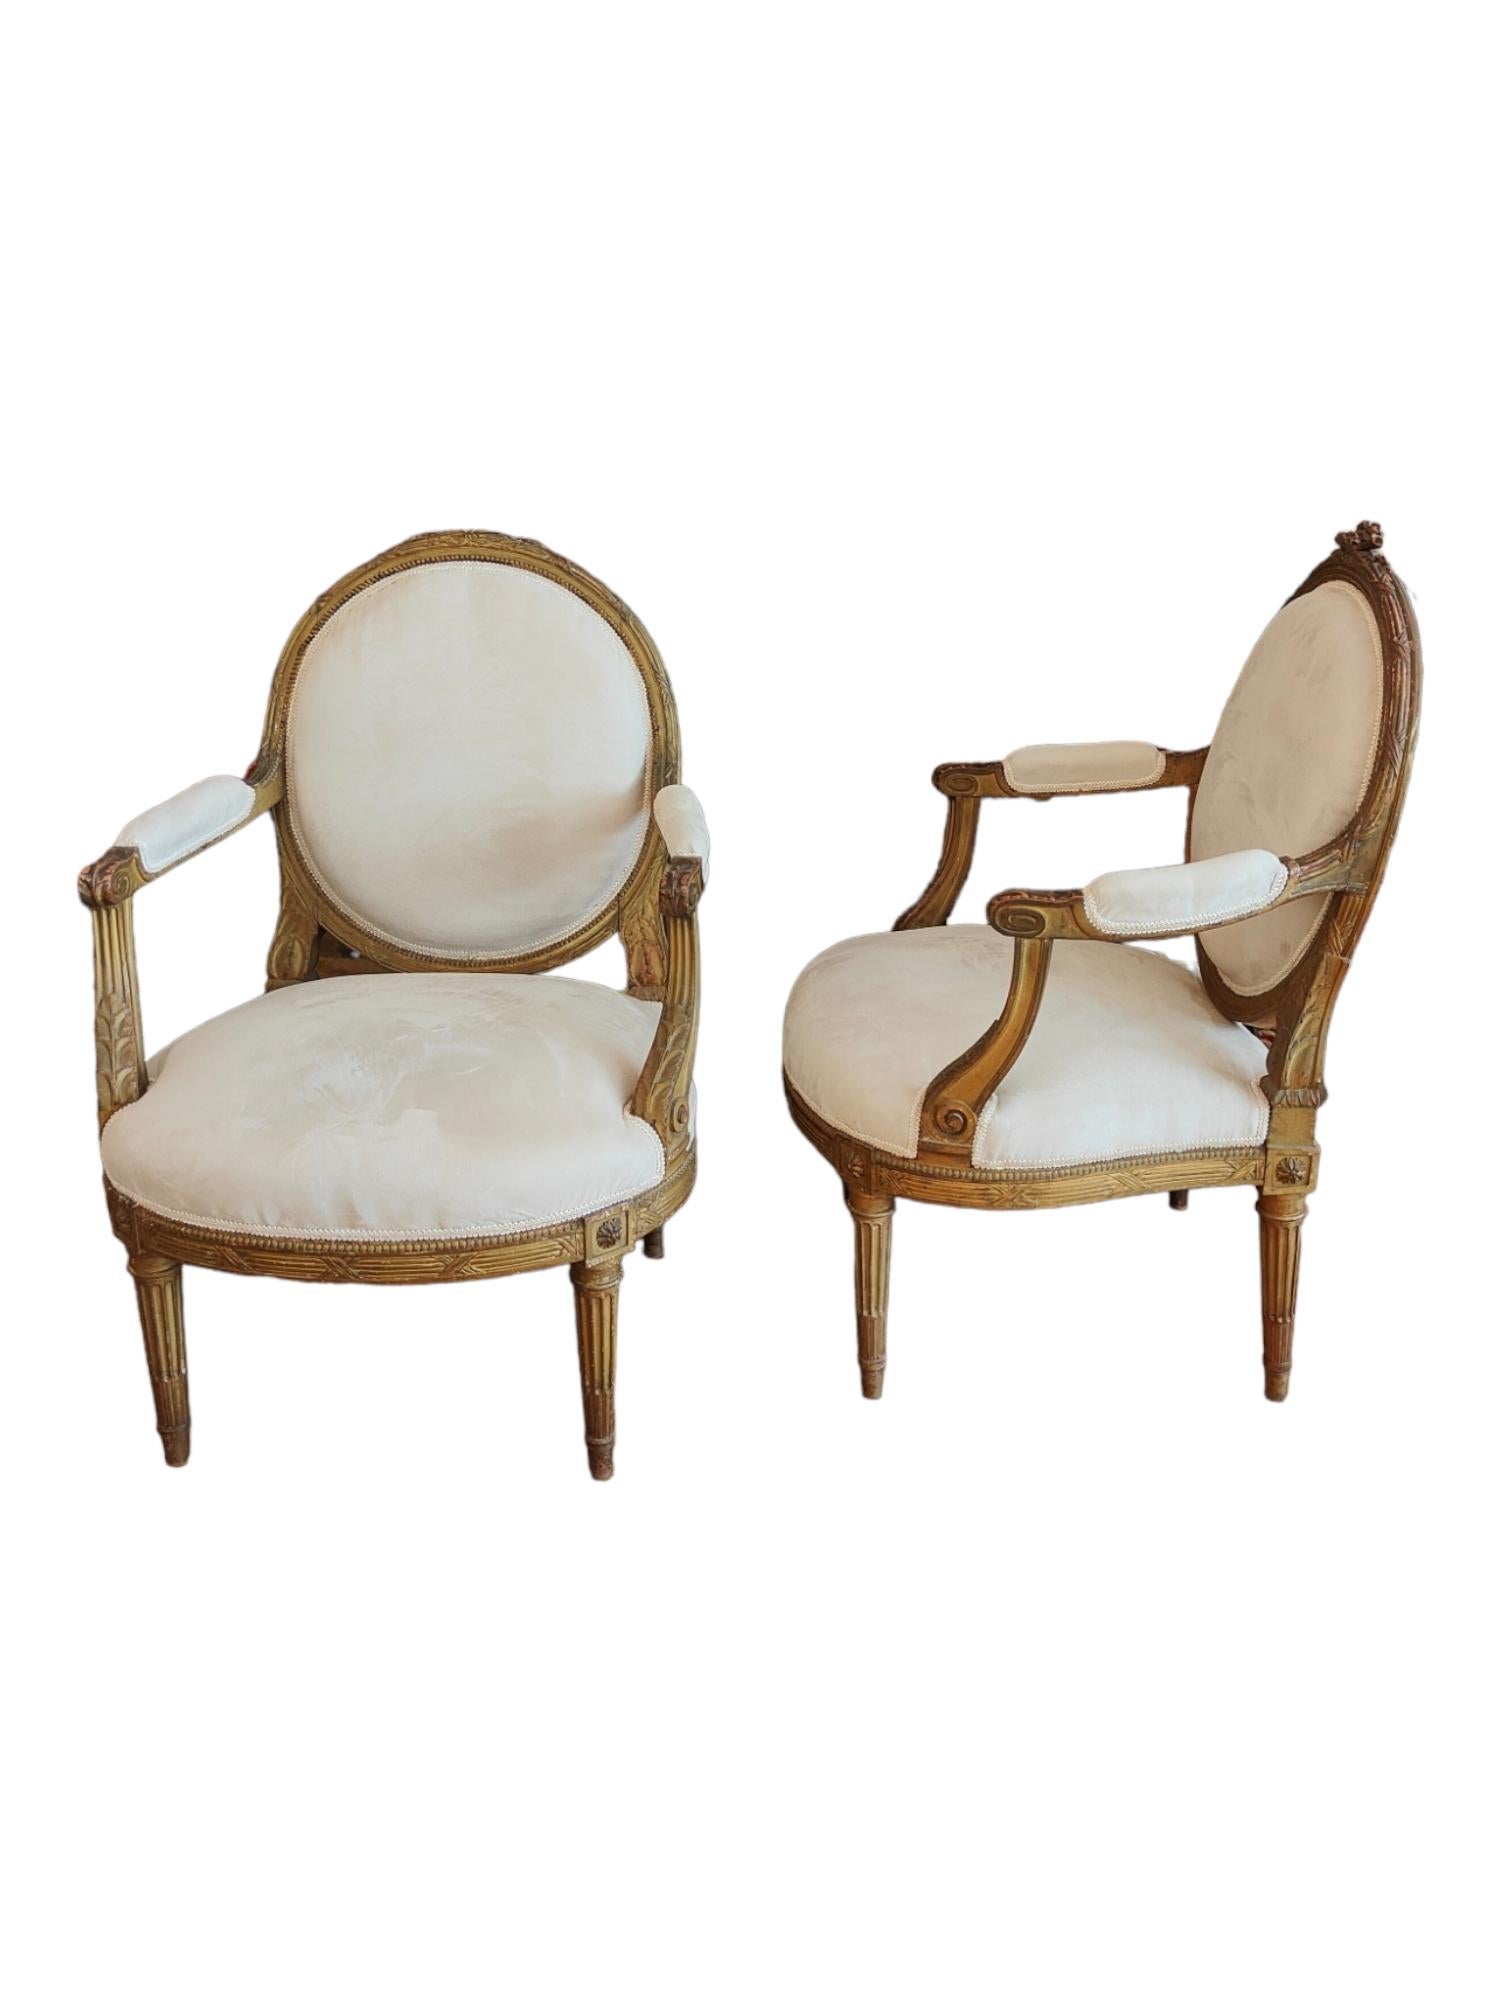 Pair Of French ArmChairs 18th Century For Sale 4